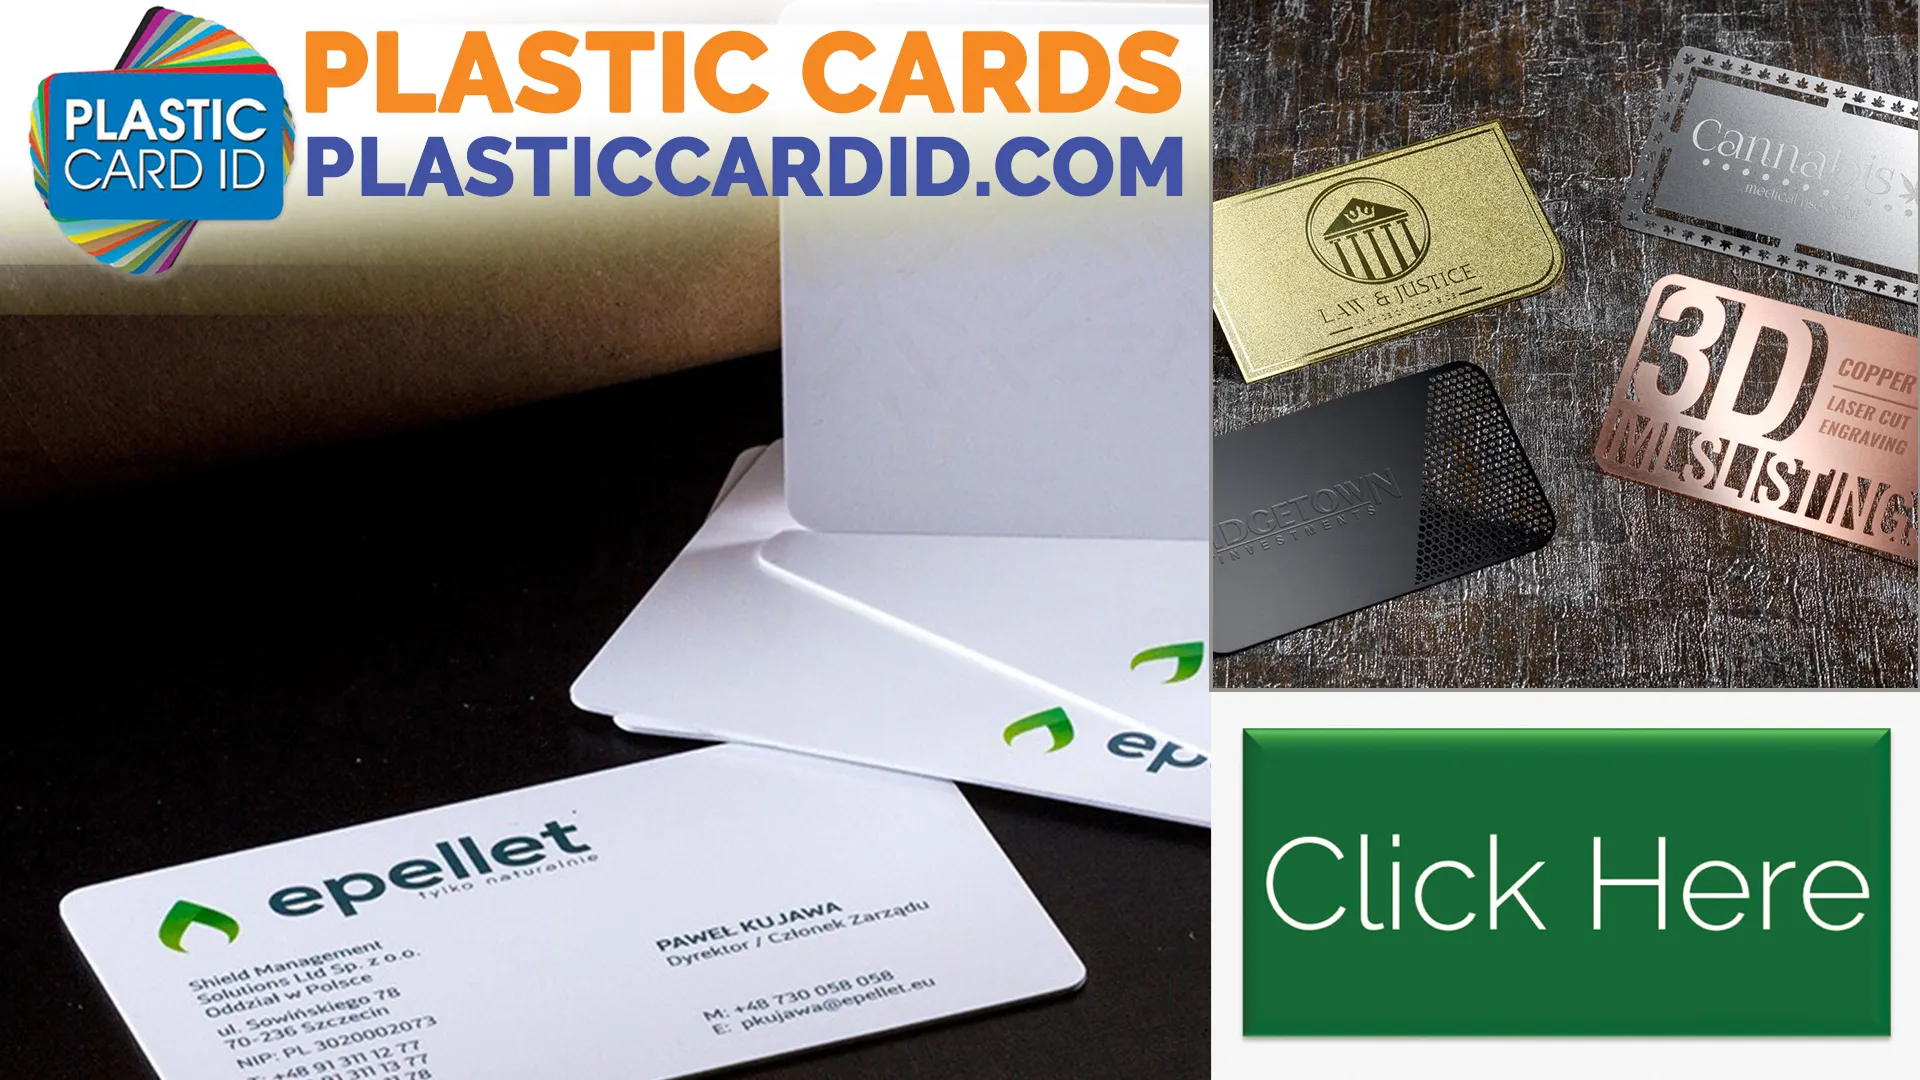 Plastic Cards by PCID
: Versatility at Its Best